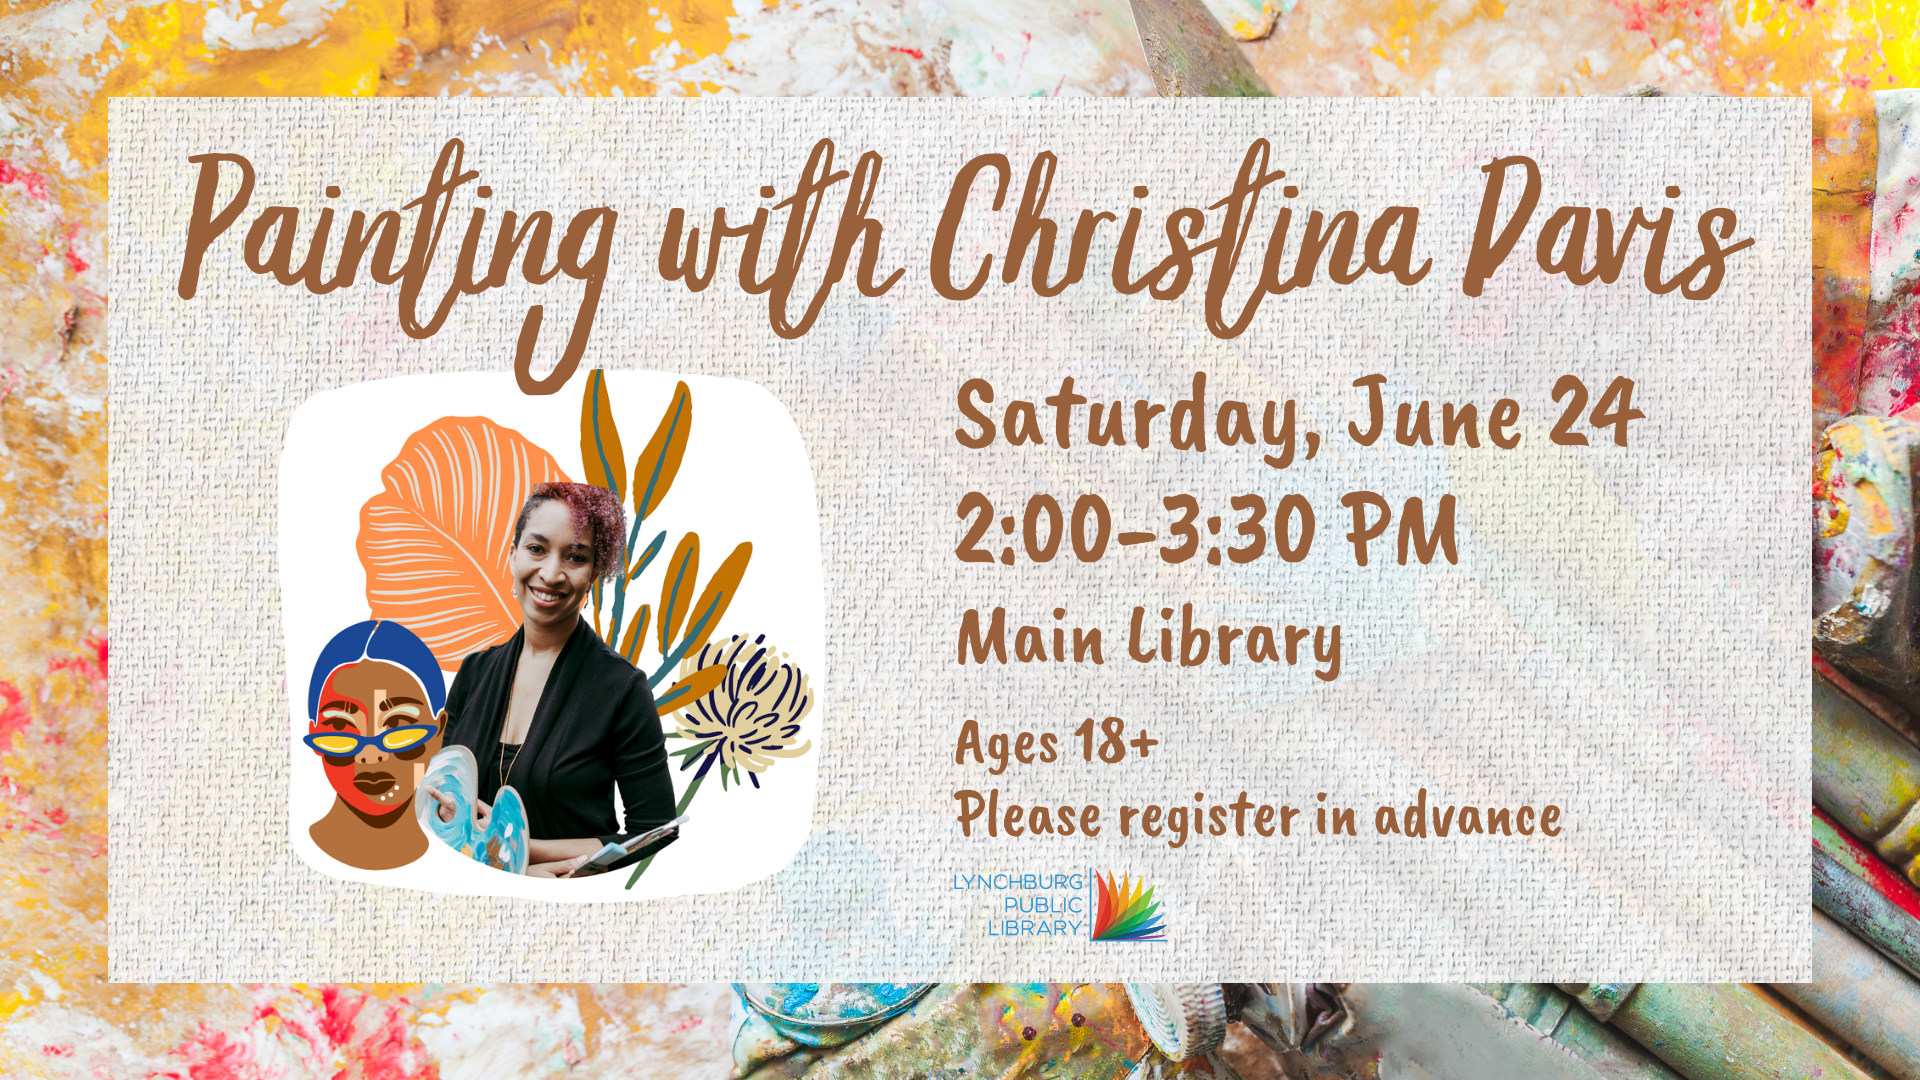 painting with christina davis; saturday, june 24, 2-3:30 pm; main library, ages 18+; please register in advance